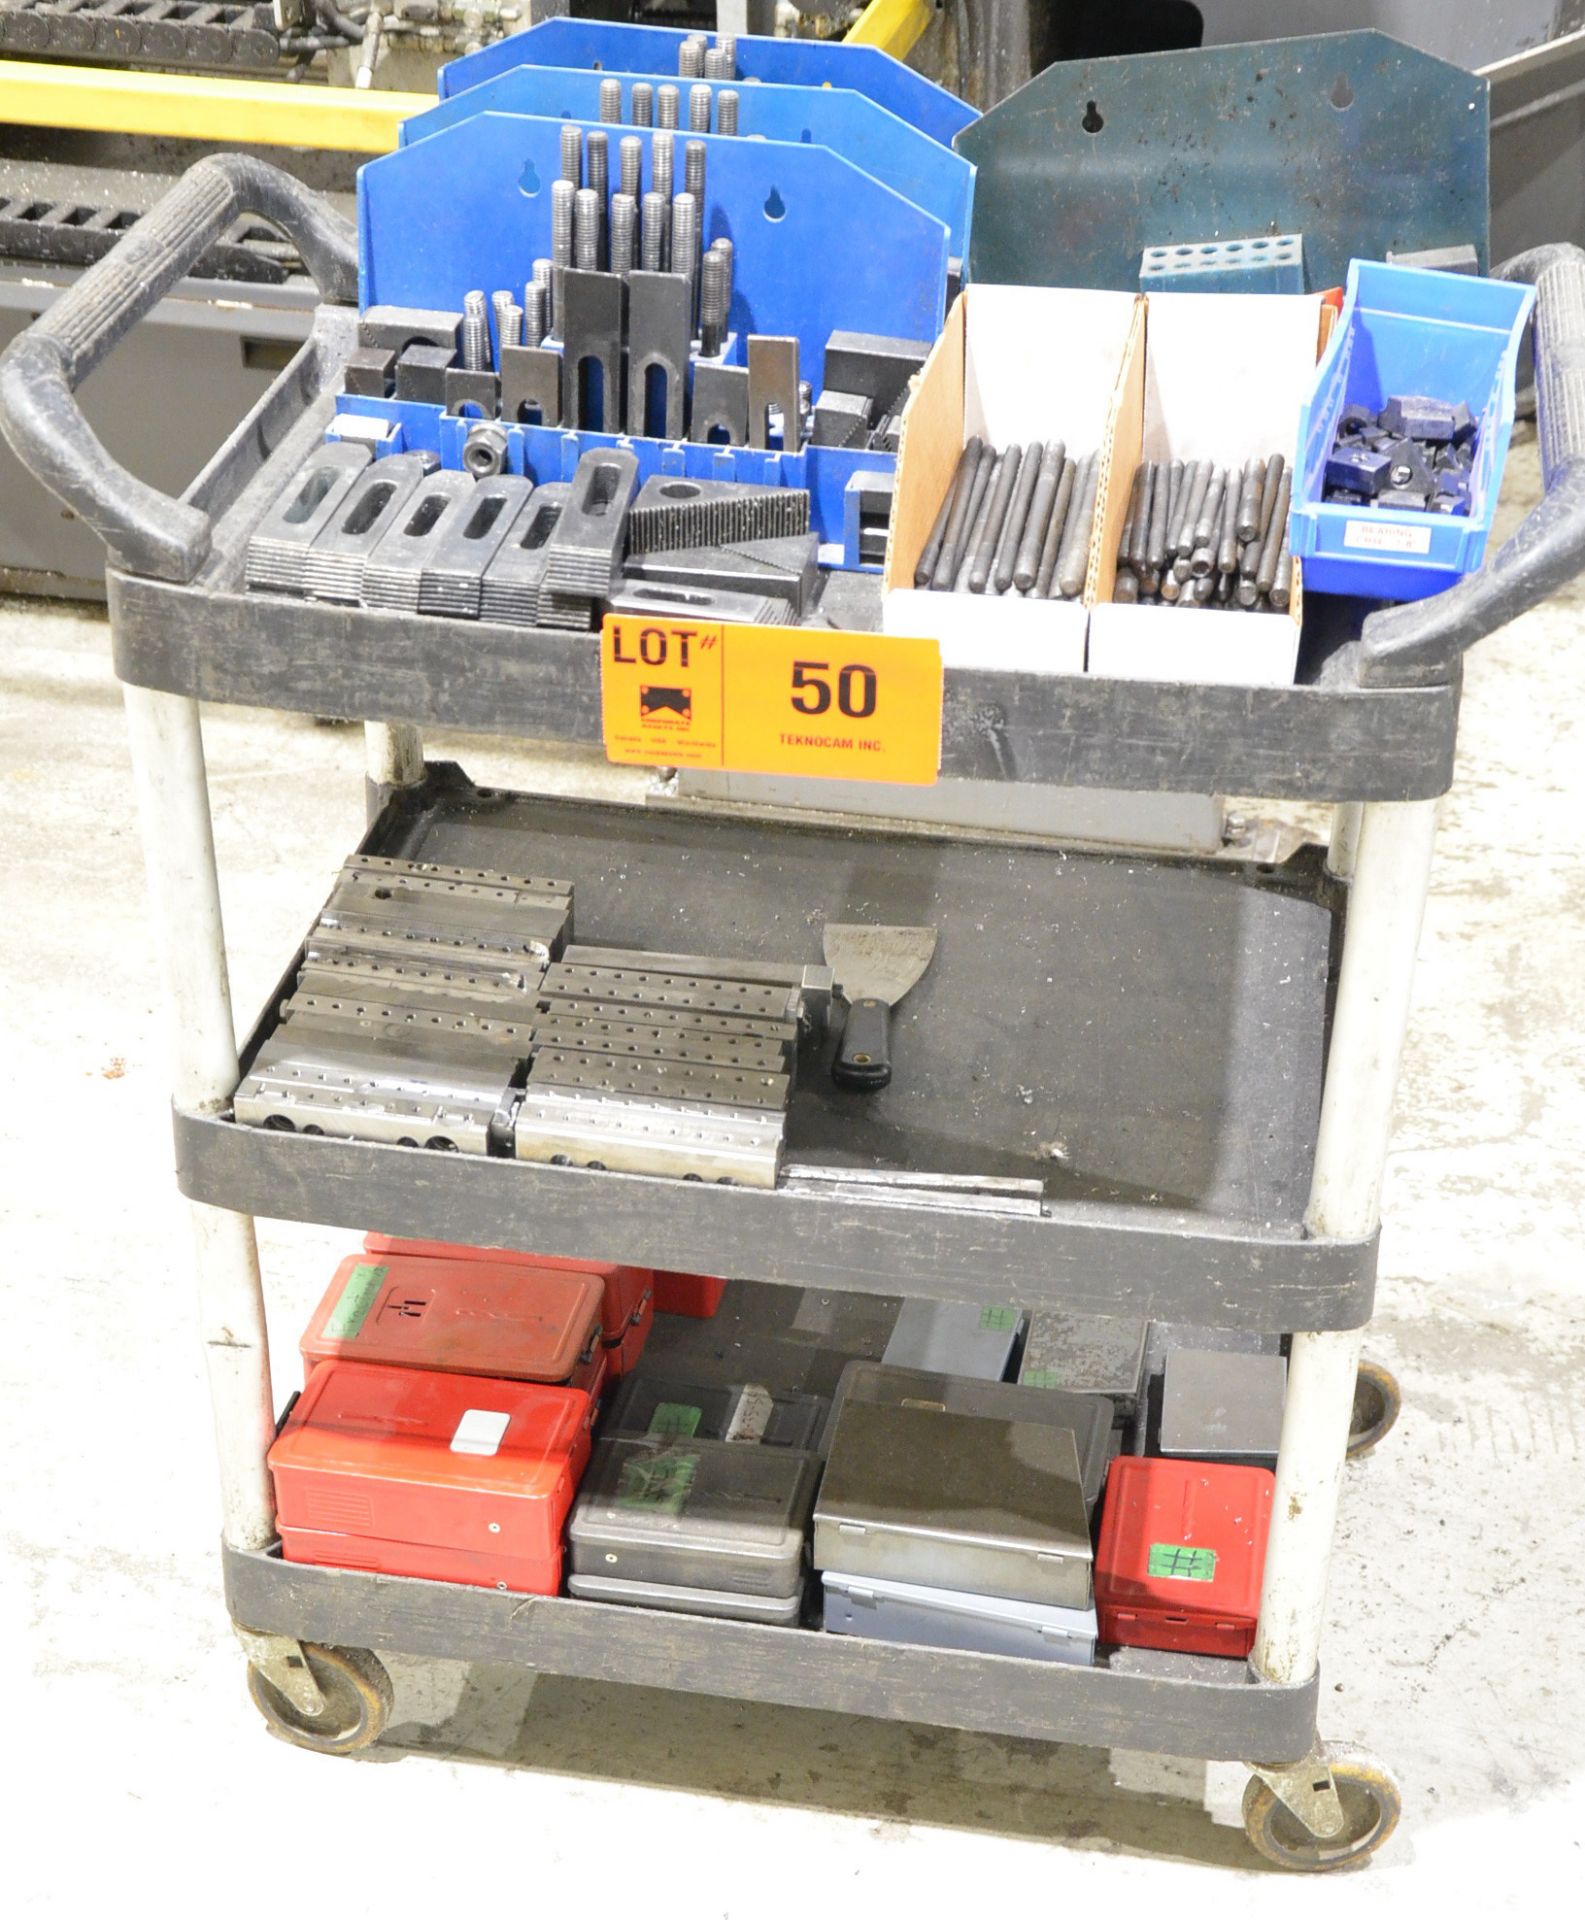 LOT/ CART WITH CONTENTS - INCLUDING TIE-DOWN CLAMPING, PARALLELS, DRILL BOXES